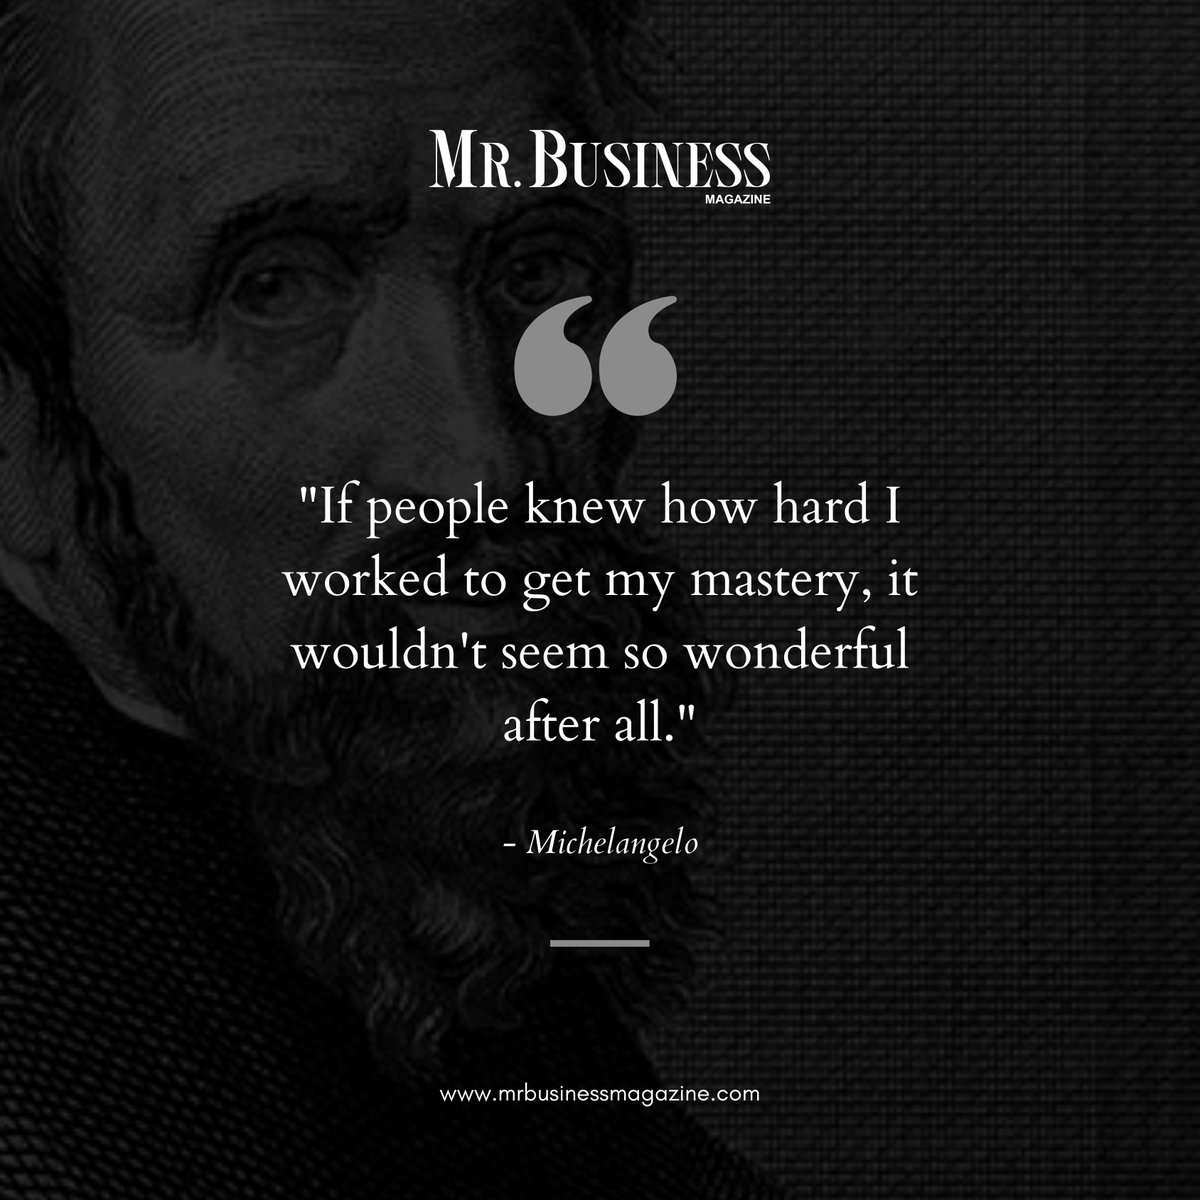 ✔Behind every mastery lies countless hours of hard work and dedication. It's not just magic; it's relentless effort.
For more information 
📕Read  - mrbusinessmagazine.com

#HardWork #Dedication #Mastery #RelentlessEffort #Achievement #Grind #NeverGiveUp #MrBusinessMagazine